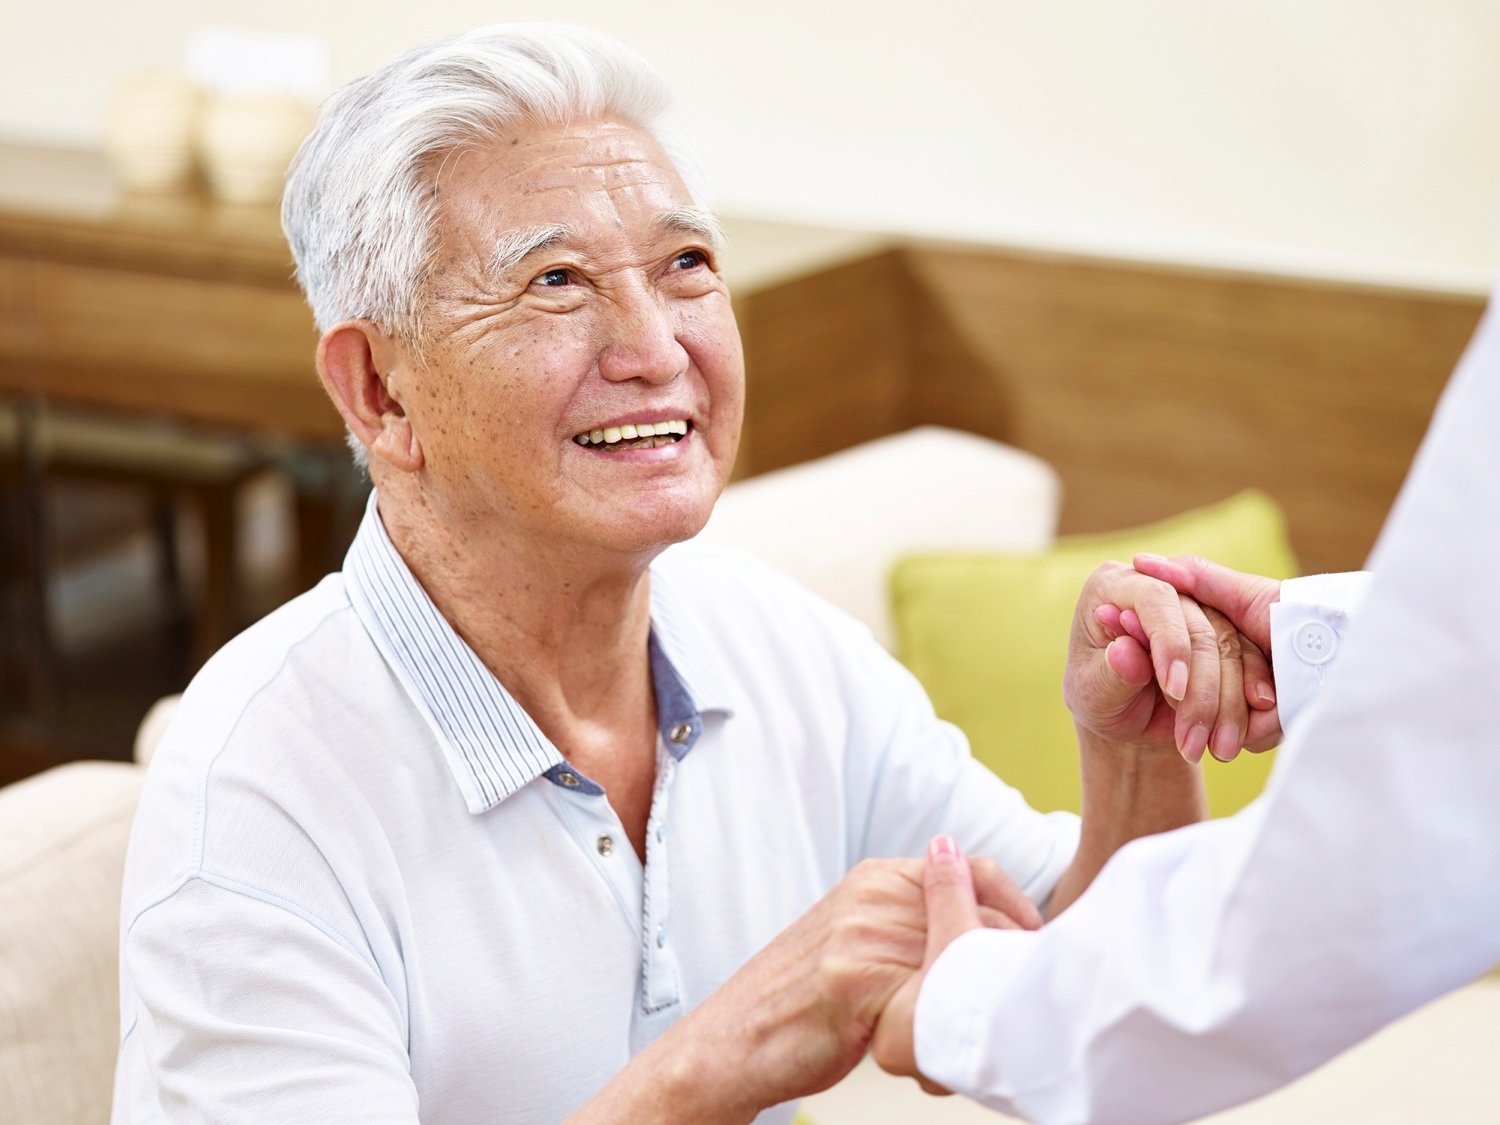 A senior man looking up at a caregiver and holding their hands